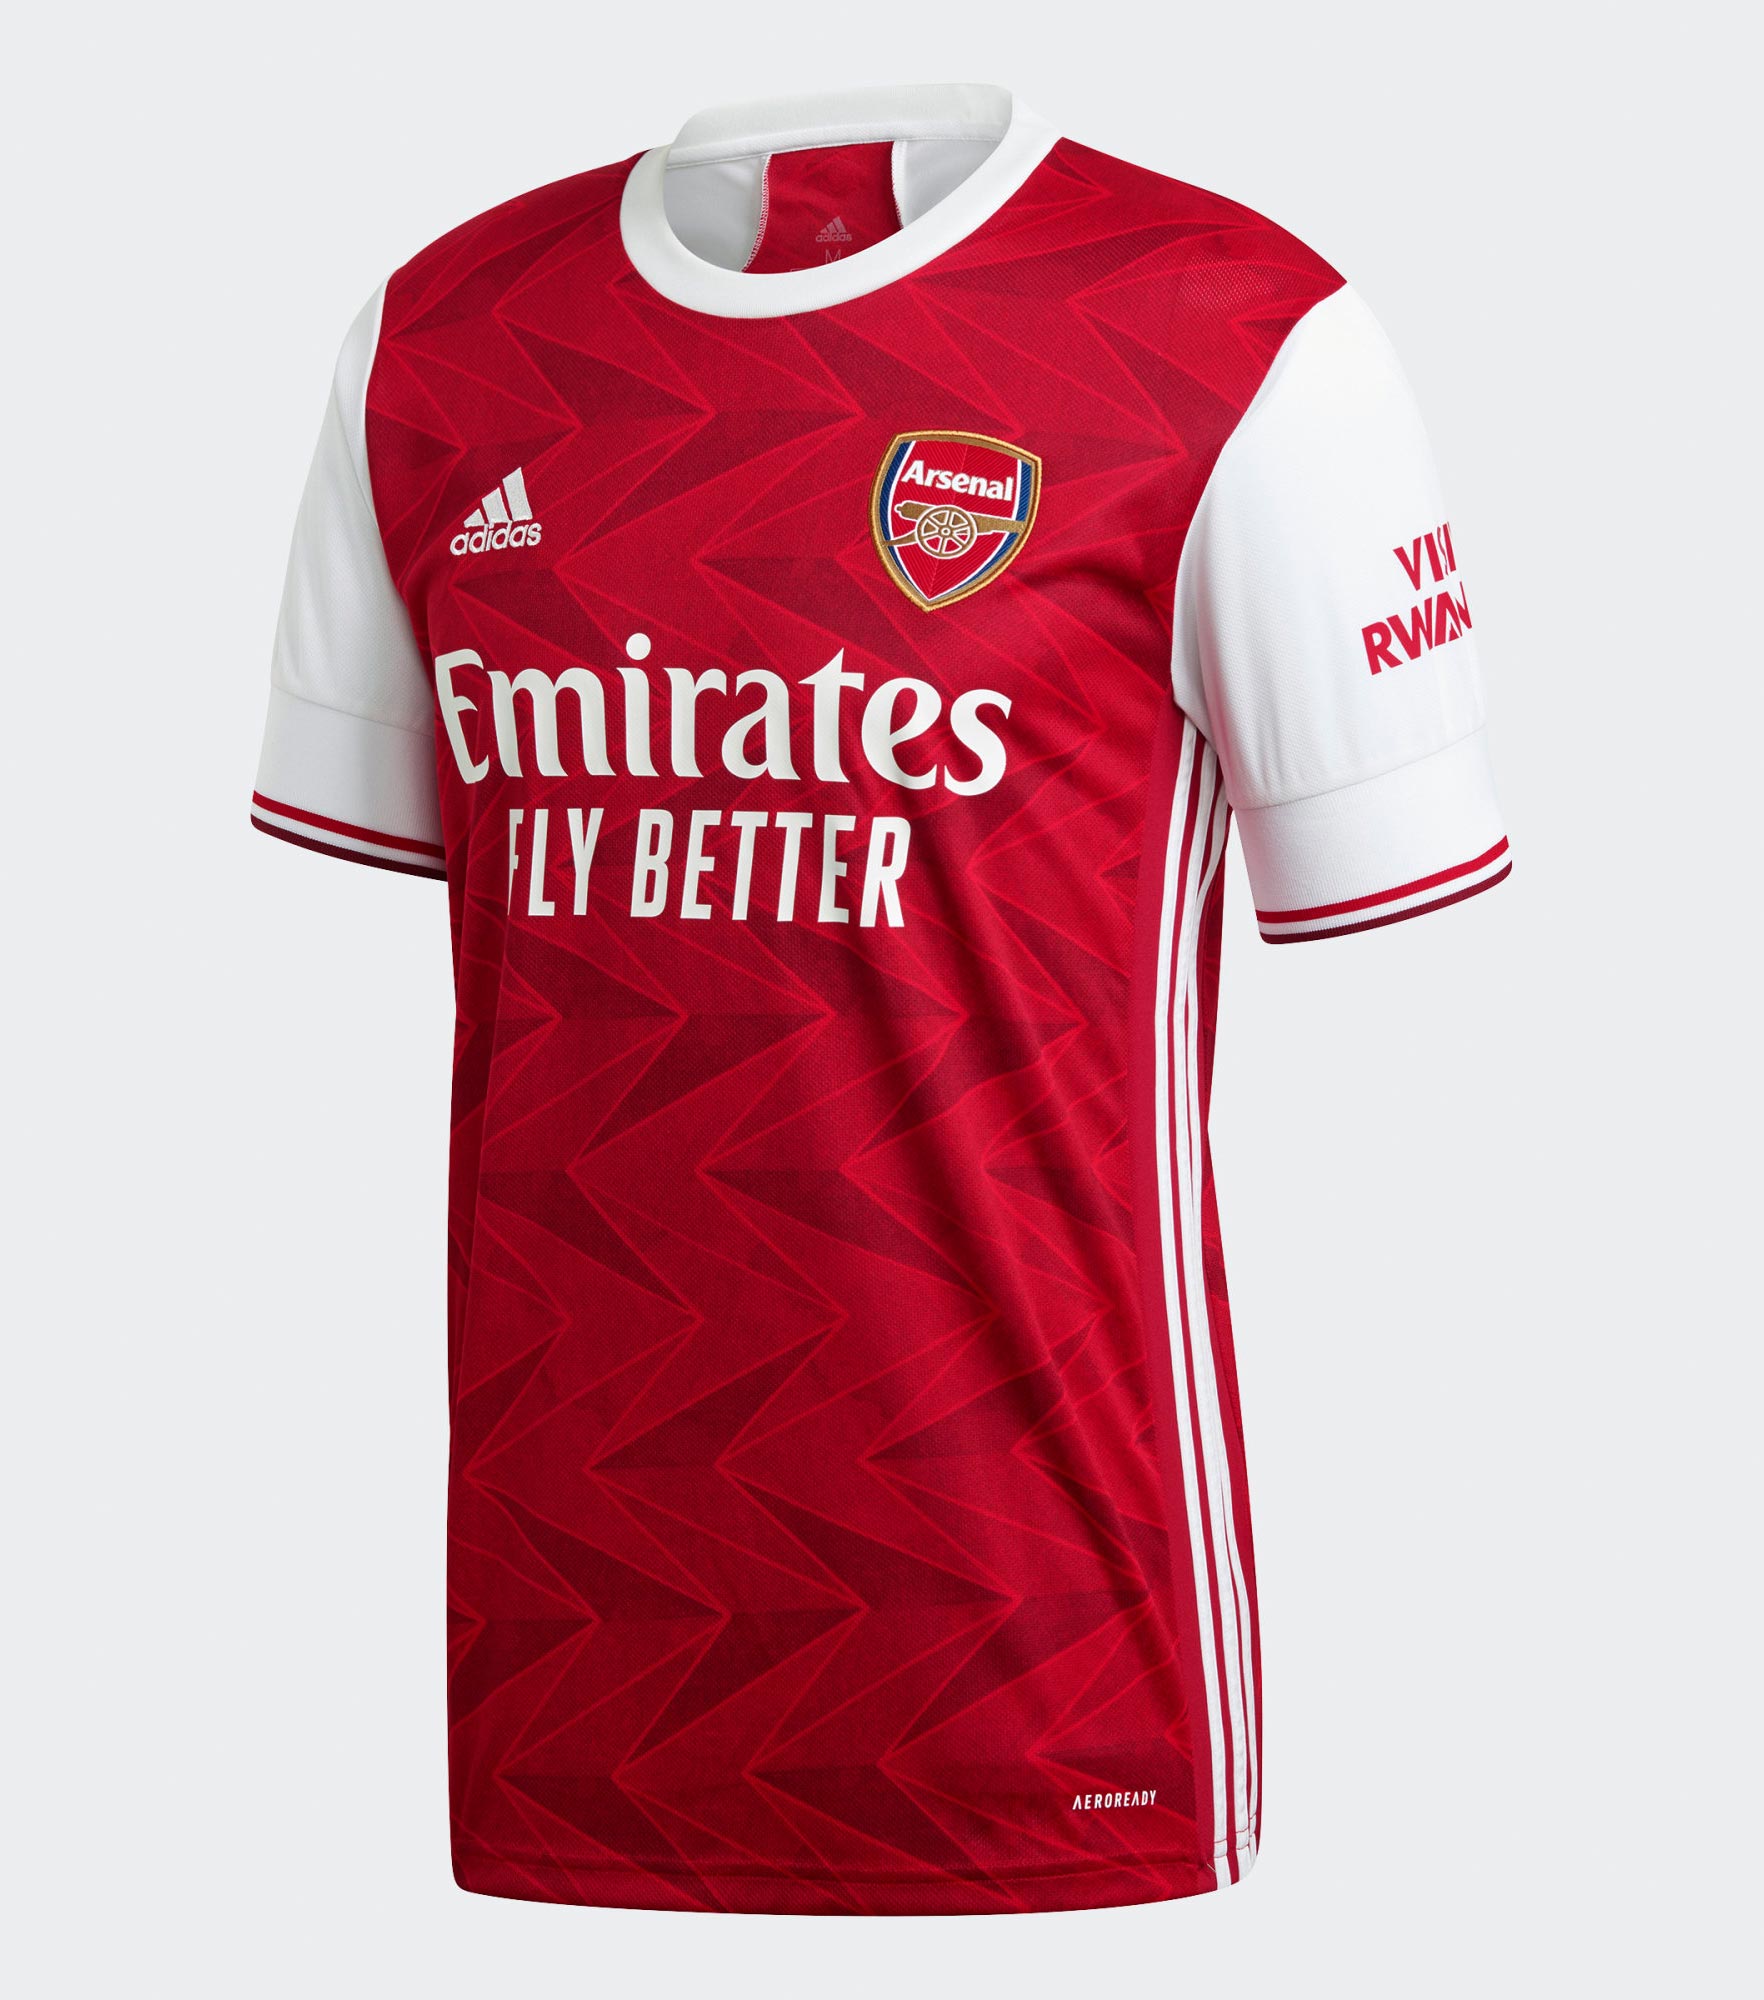 Arsenal FC 2020/21 Home Jersey 